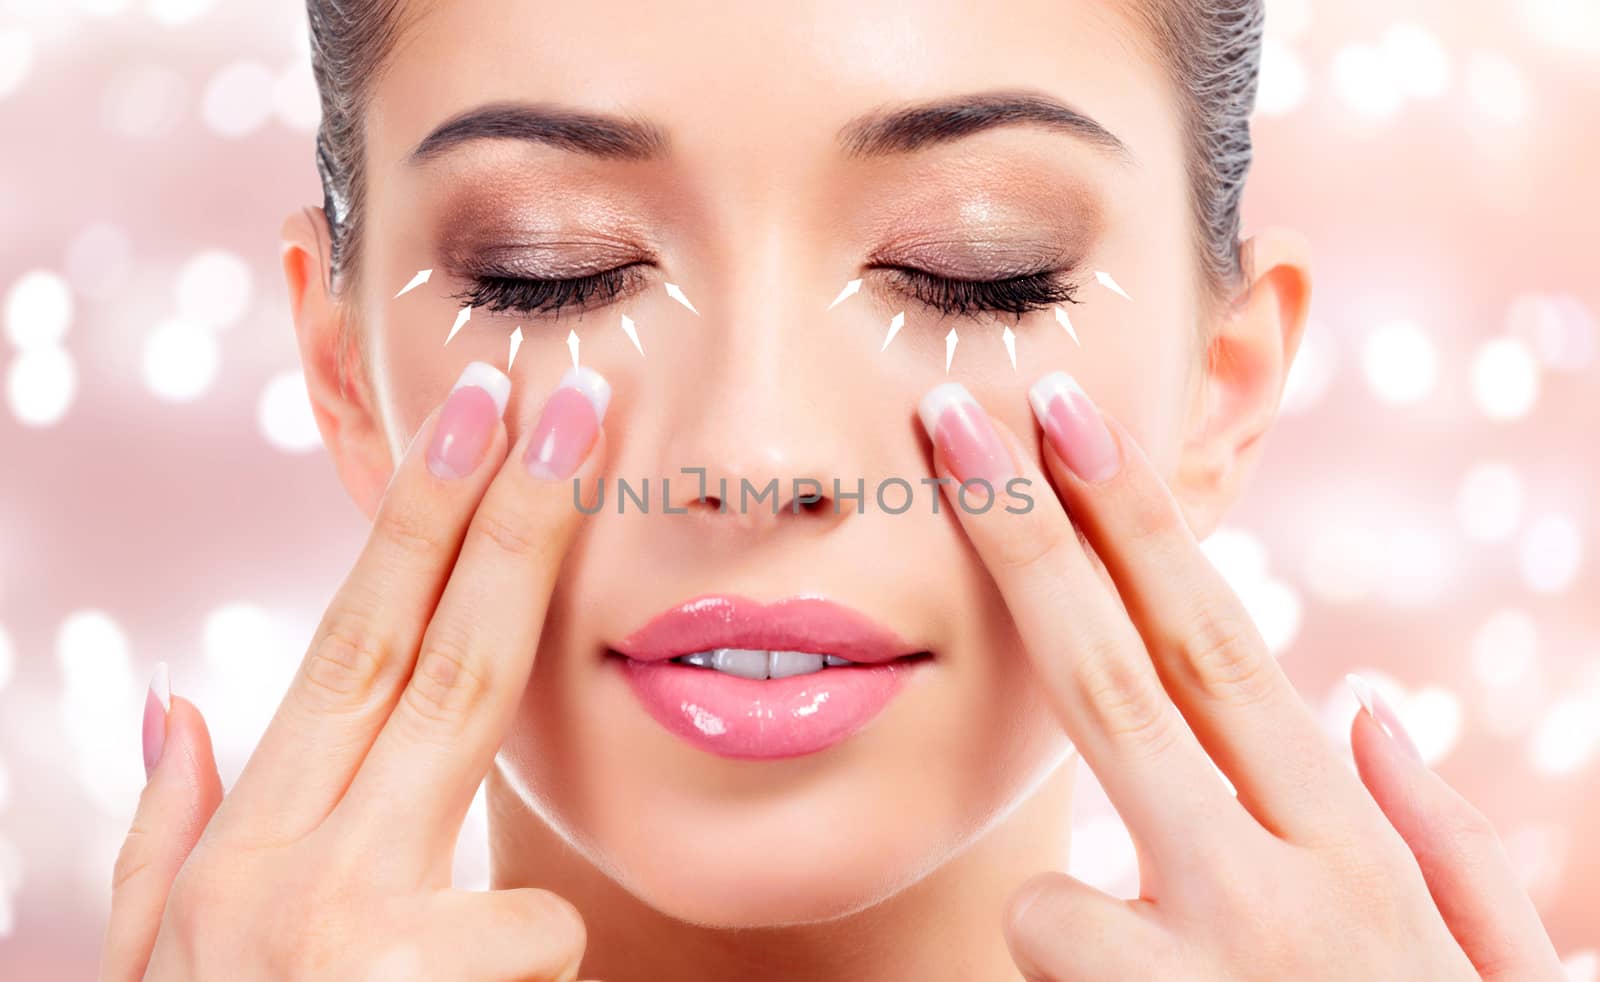 Pretty woman massaging her face, skin treatment concept. Abstract background with blurred lights